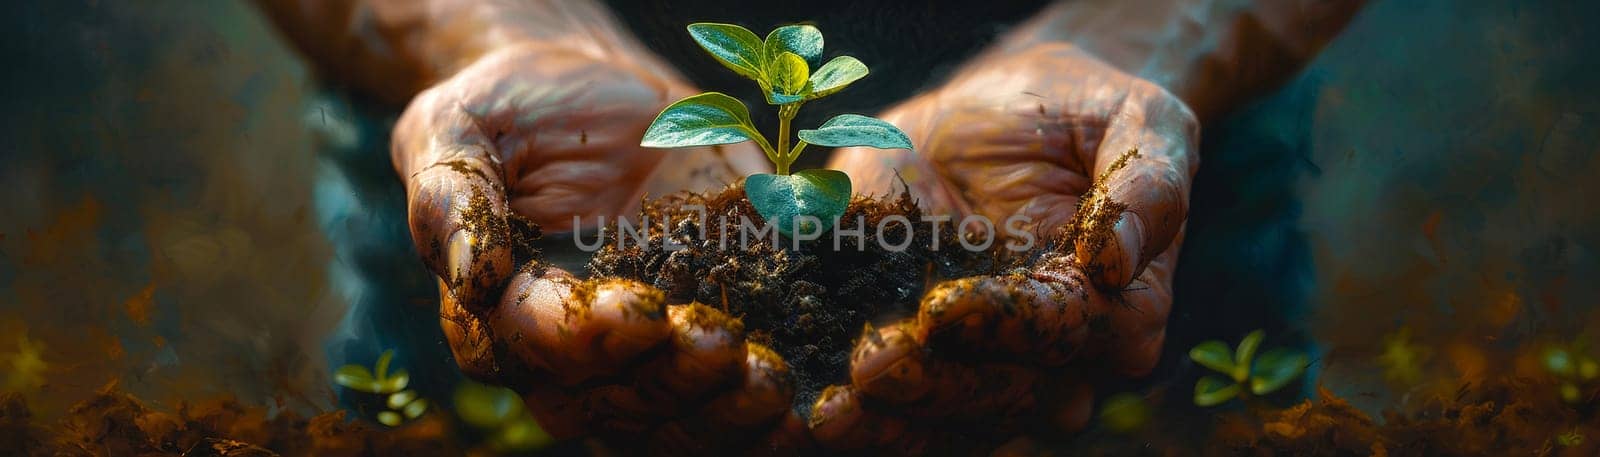 Gardener's hands nurturing a growing seedling, painted with a focus on texture and the green of life.